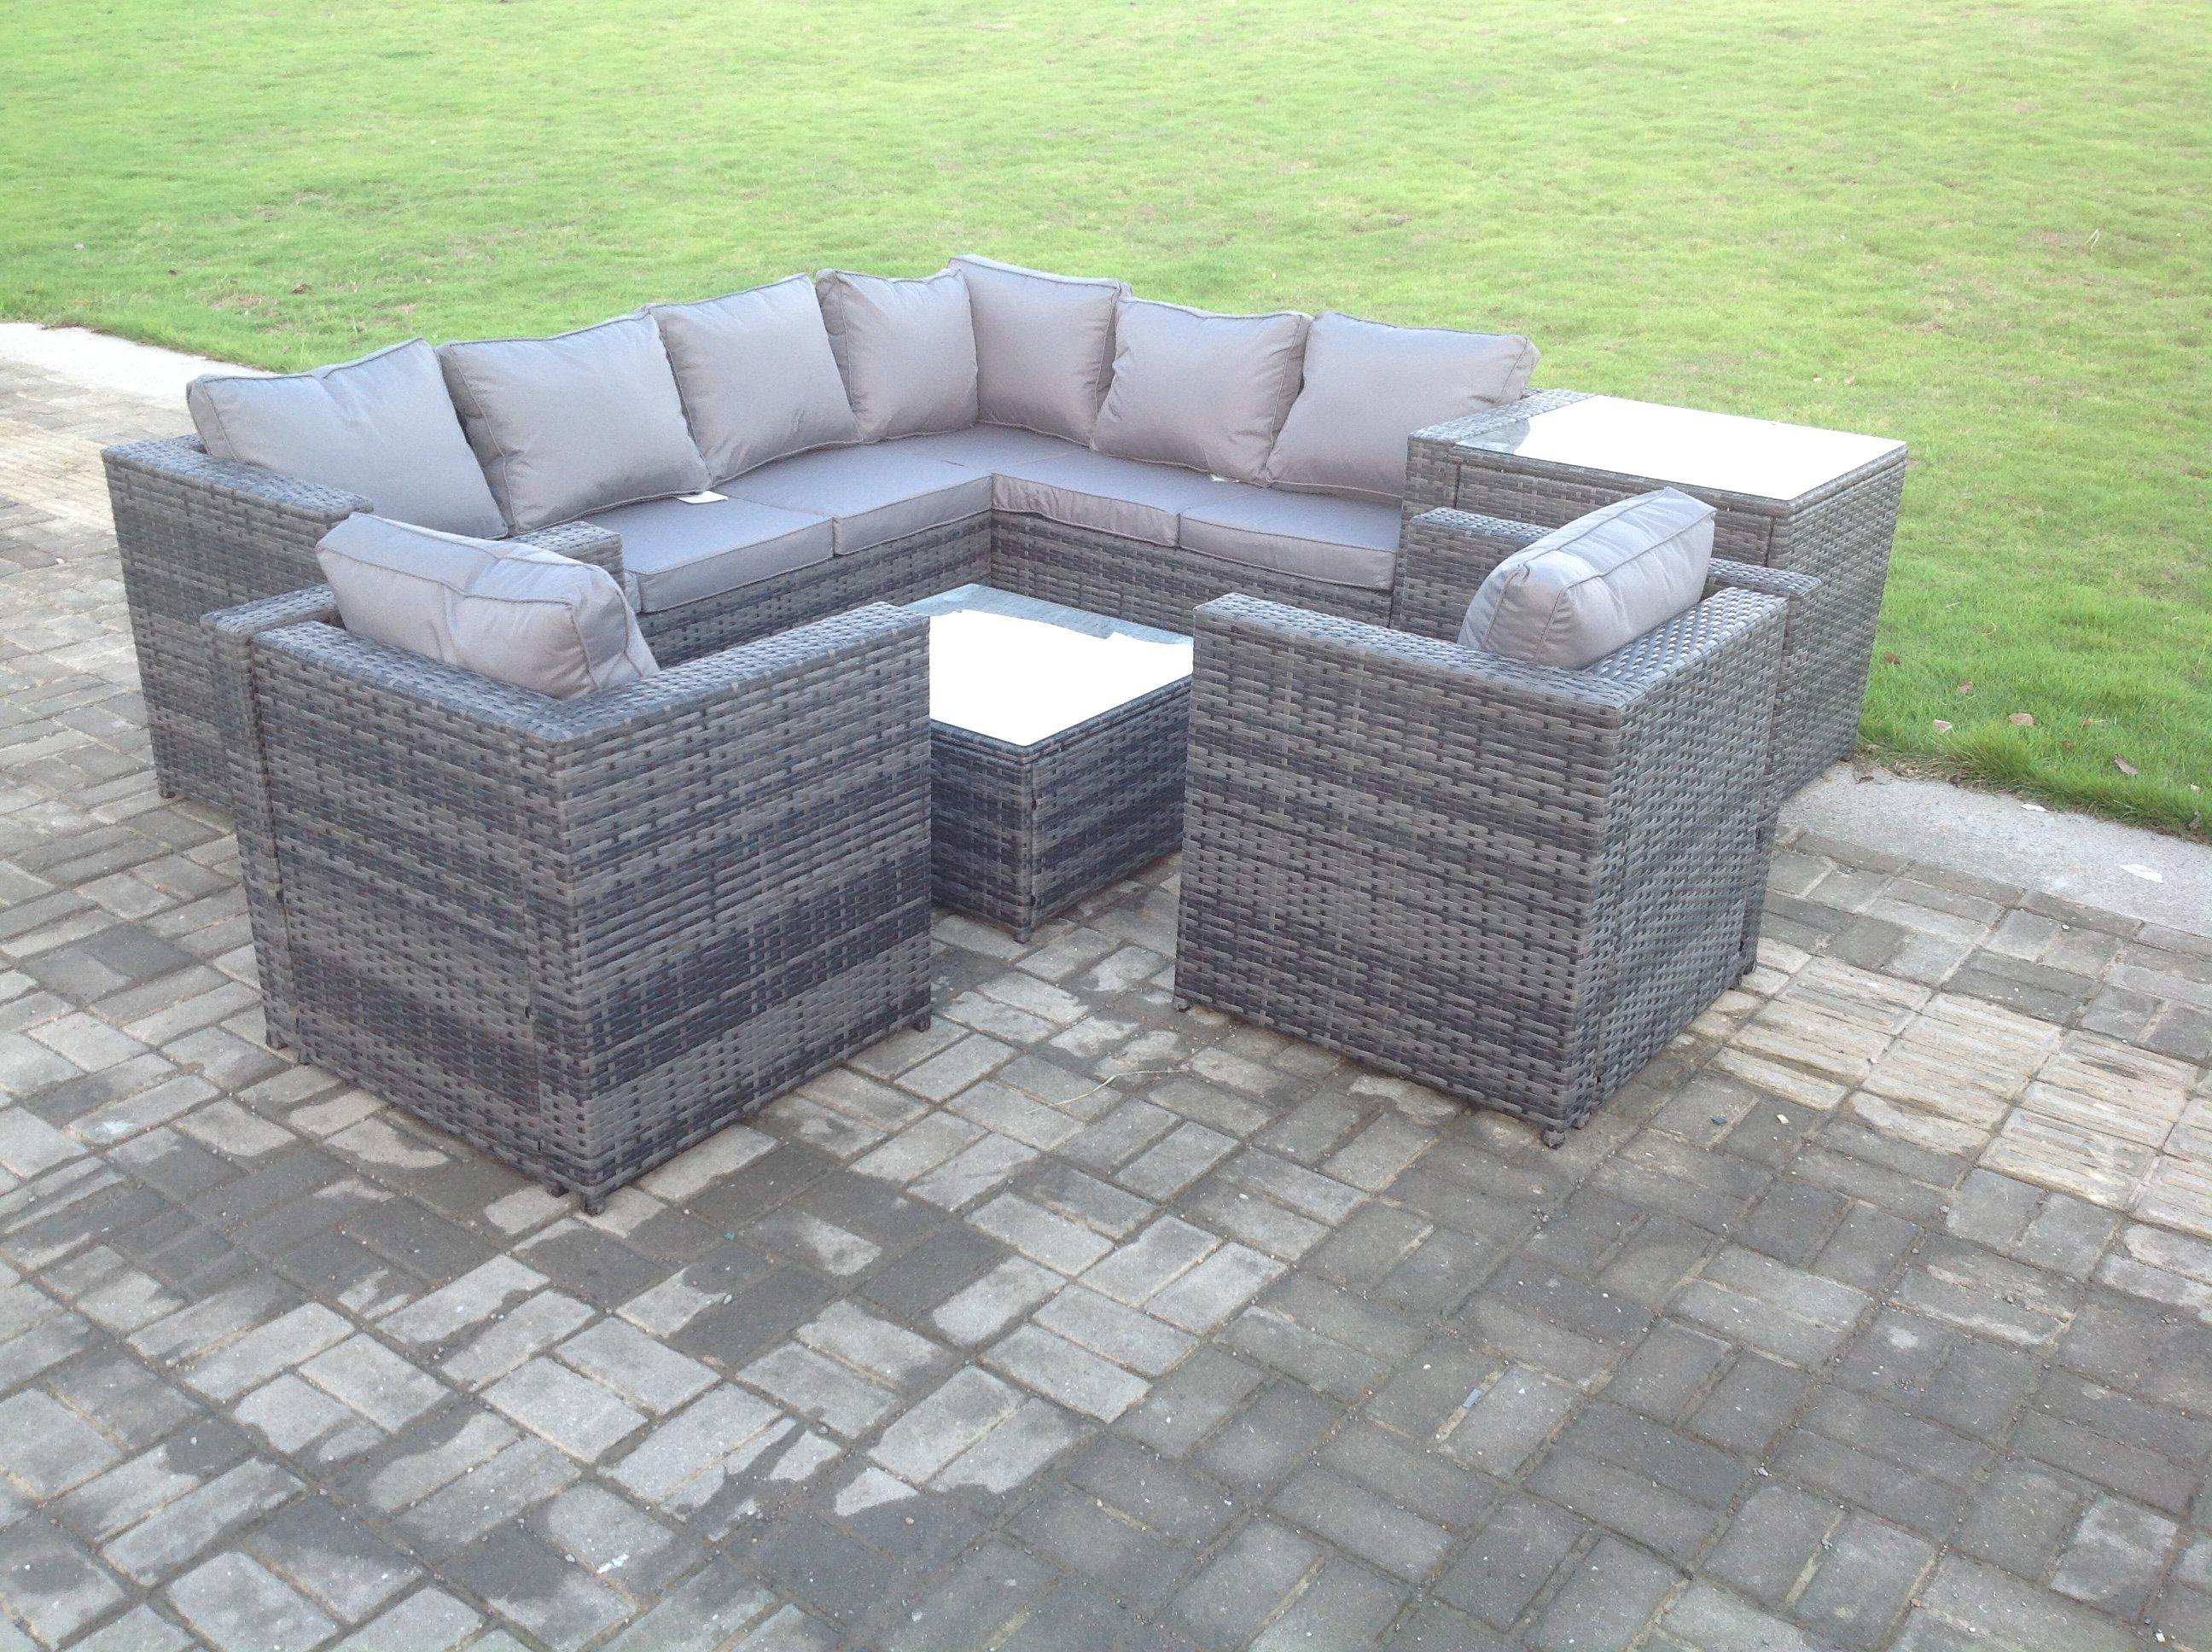 Rattan Corner Sofa Set Garden Furniture With 2 Chairs Coffee Table And Side Table